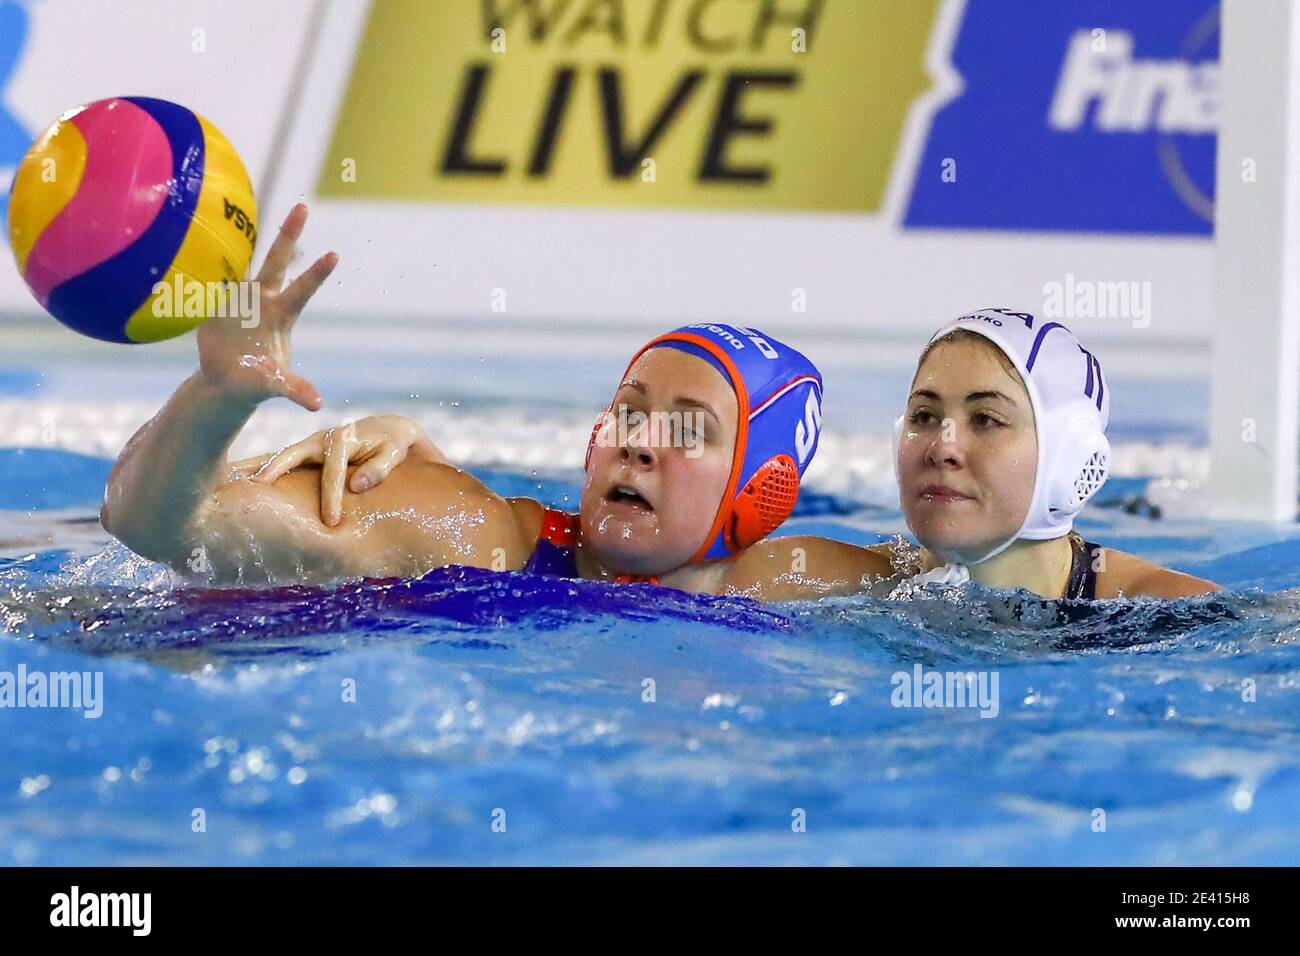 Trieste, Italy. 21st Jan, 2021. TRIESTE, ITALY - JANUARY 21: Iris Wolves of Netherlands, Yaelle Deschampt of France during the match between France and The Netherlands at Women's Water Polo Olympic Games Qualification Tournament at Bruno Bianchi Aquatic Center on January 21, 2021 in Trieste, Italy (Photo by Marcel ter Bals/Orange Pictures/Alamy Live News) Stock Photo